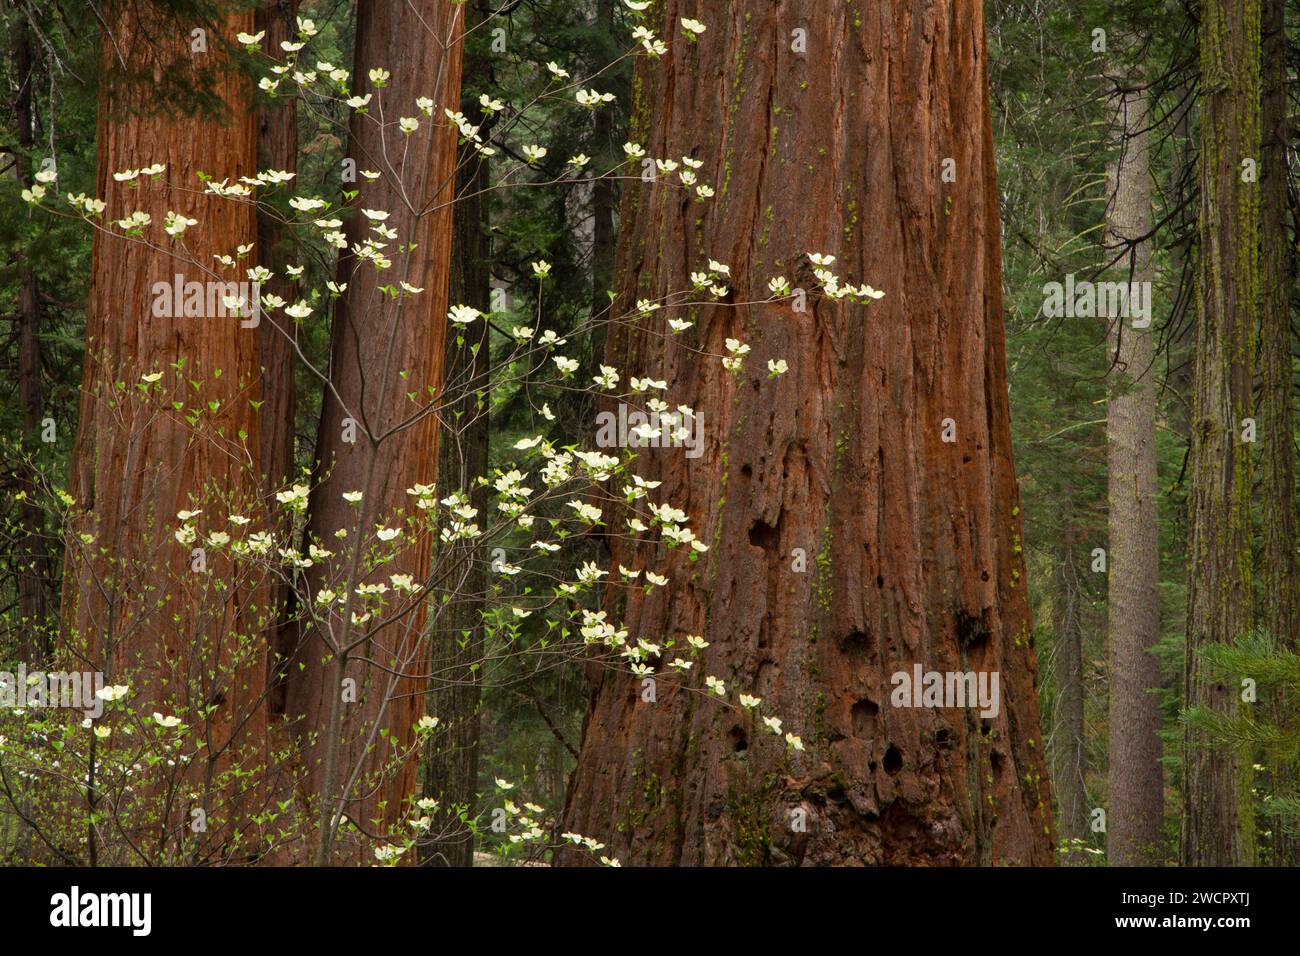 Pacific dogwood with sequoia in North Grove, Calaveras Big Trees State Park, Ebbetts Pass National Scenic Byway, California Stock Photo